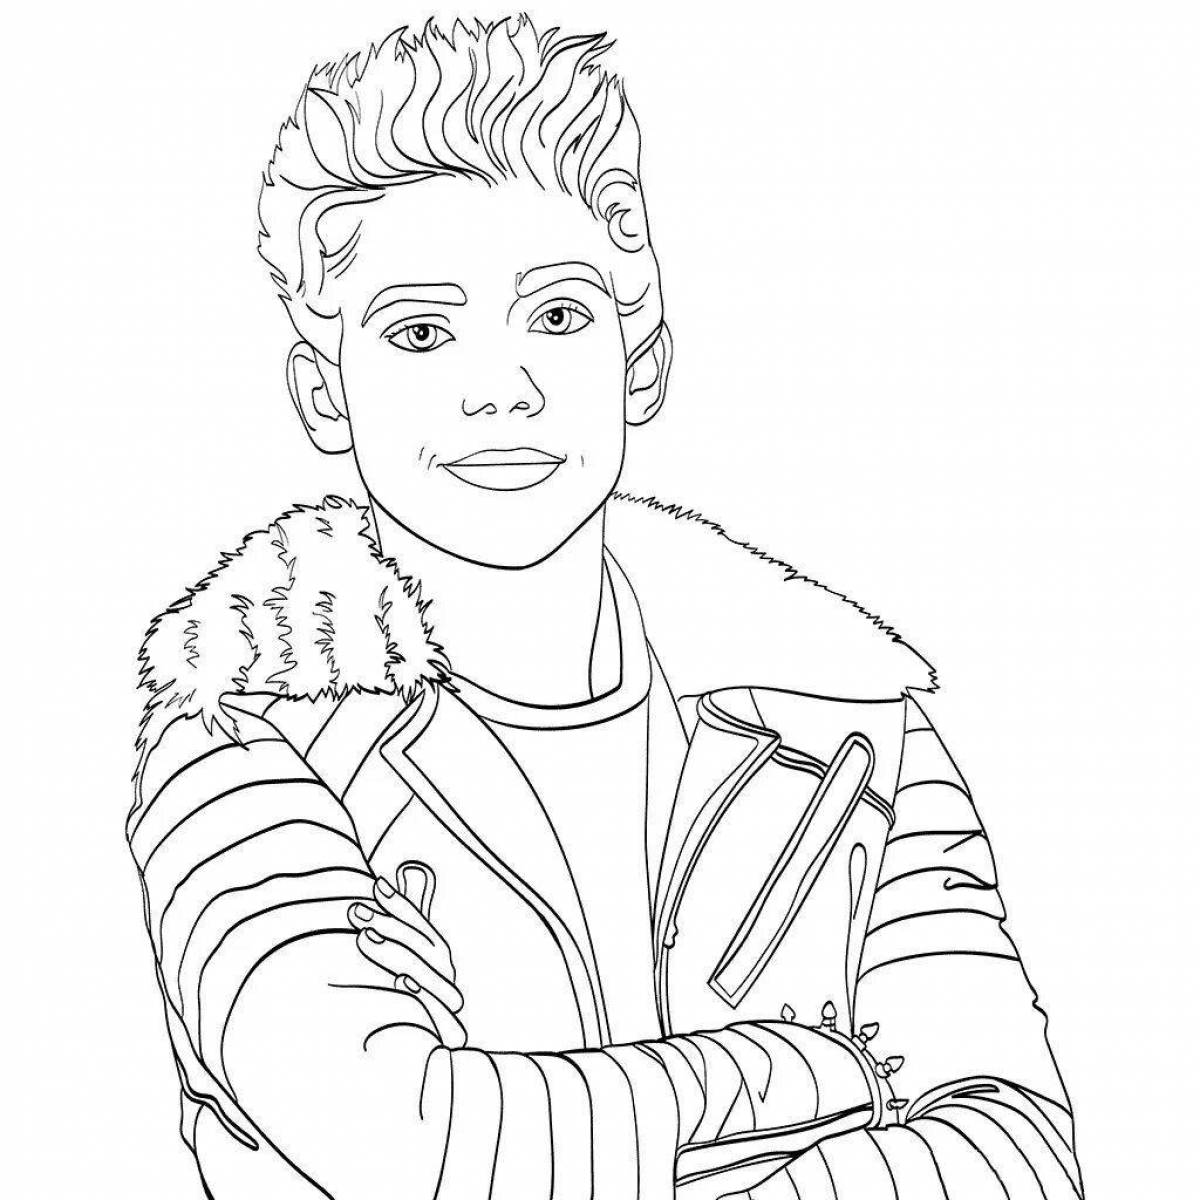 Coloring page dazzling hairs